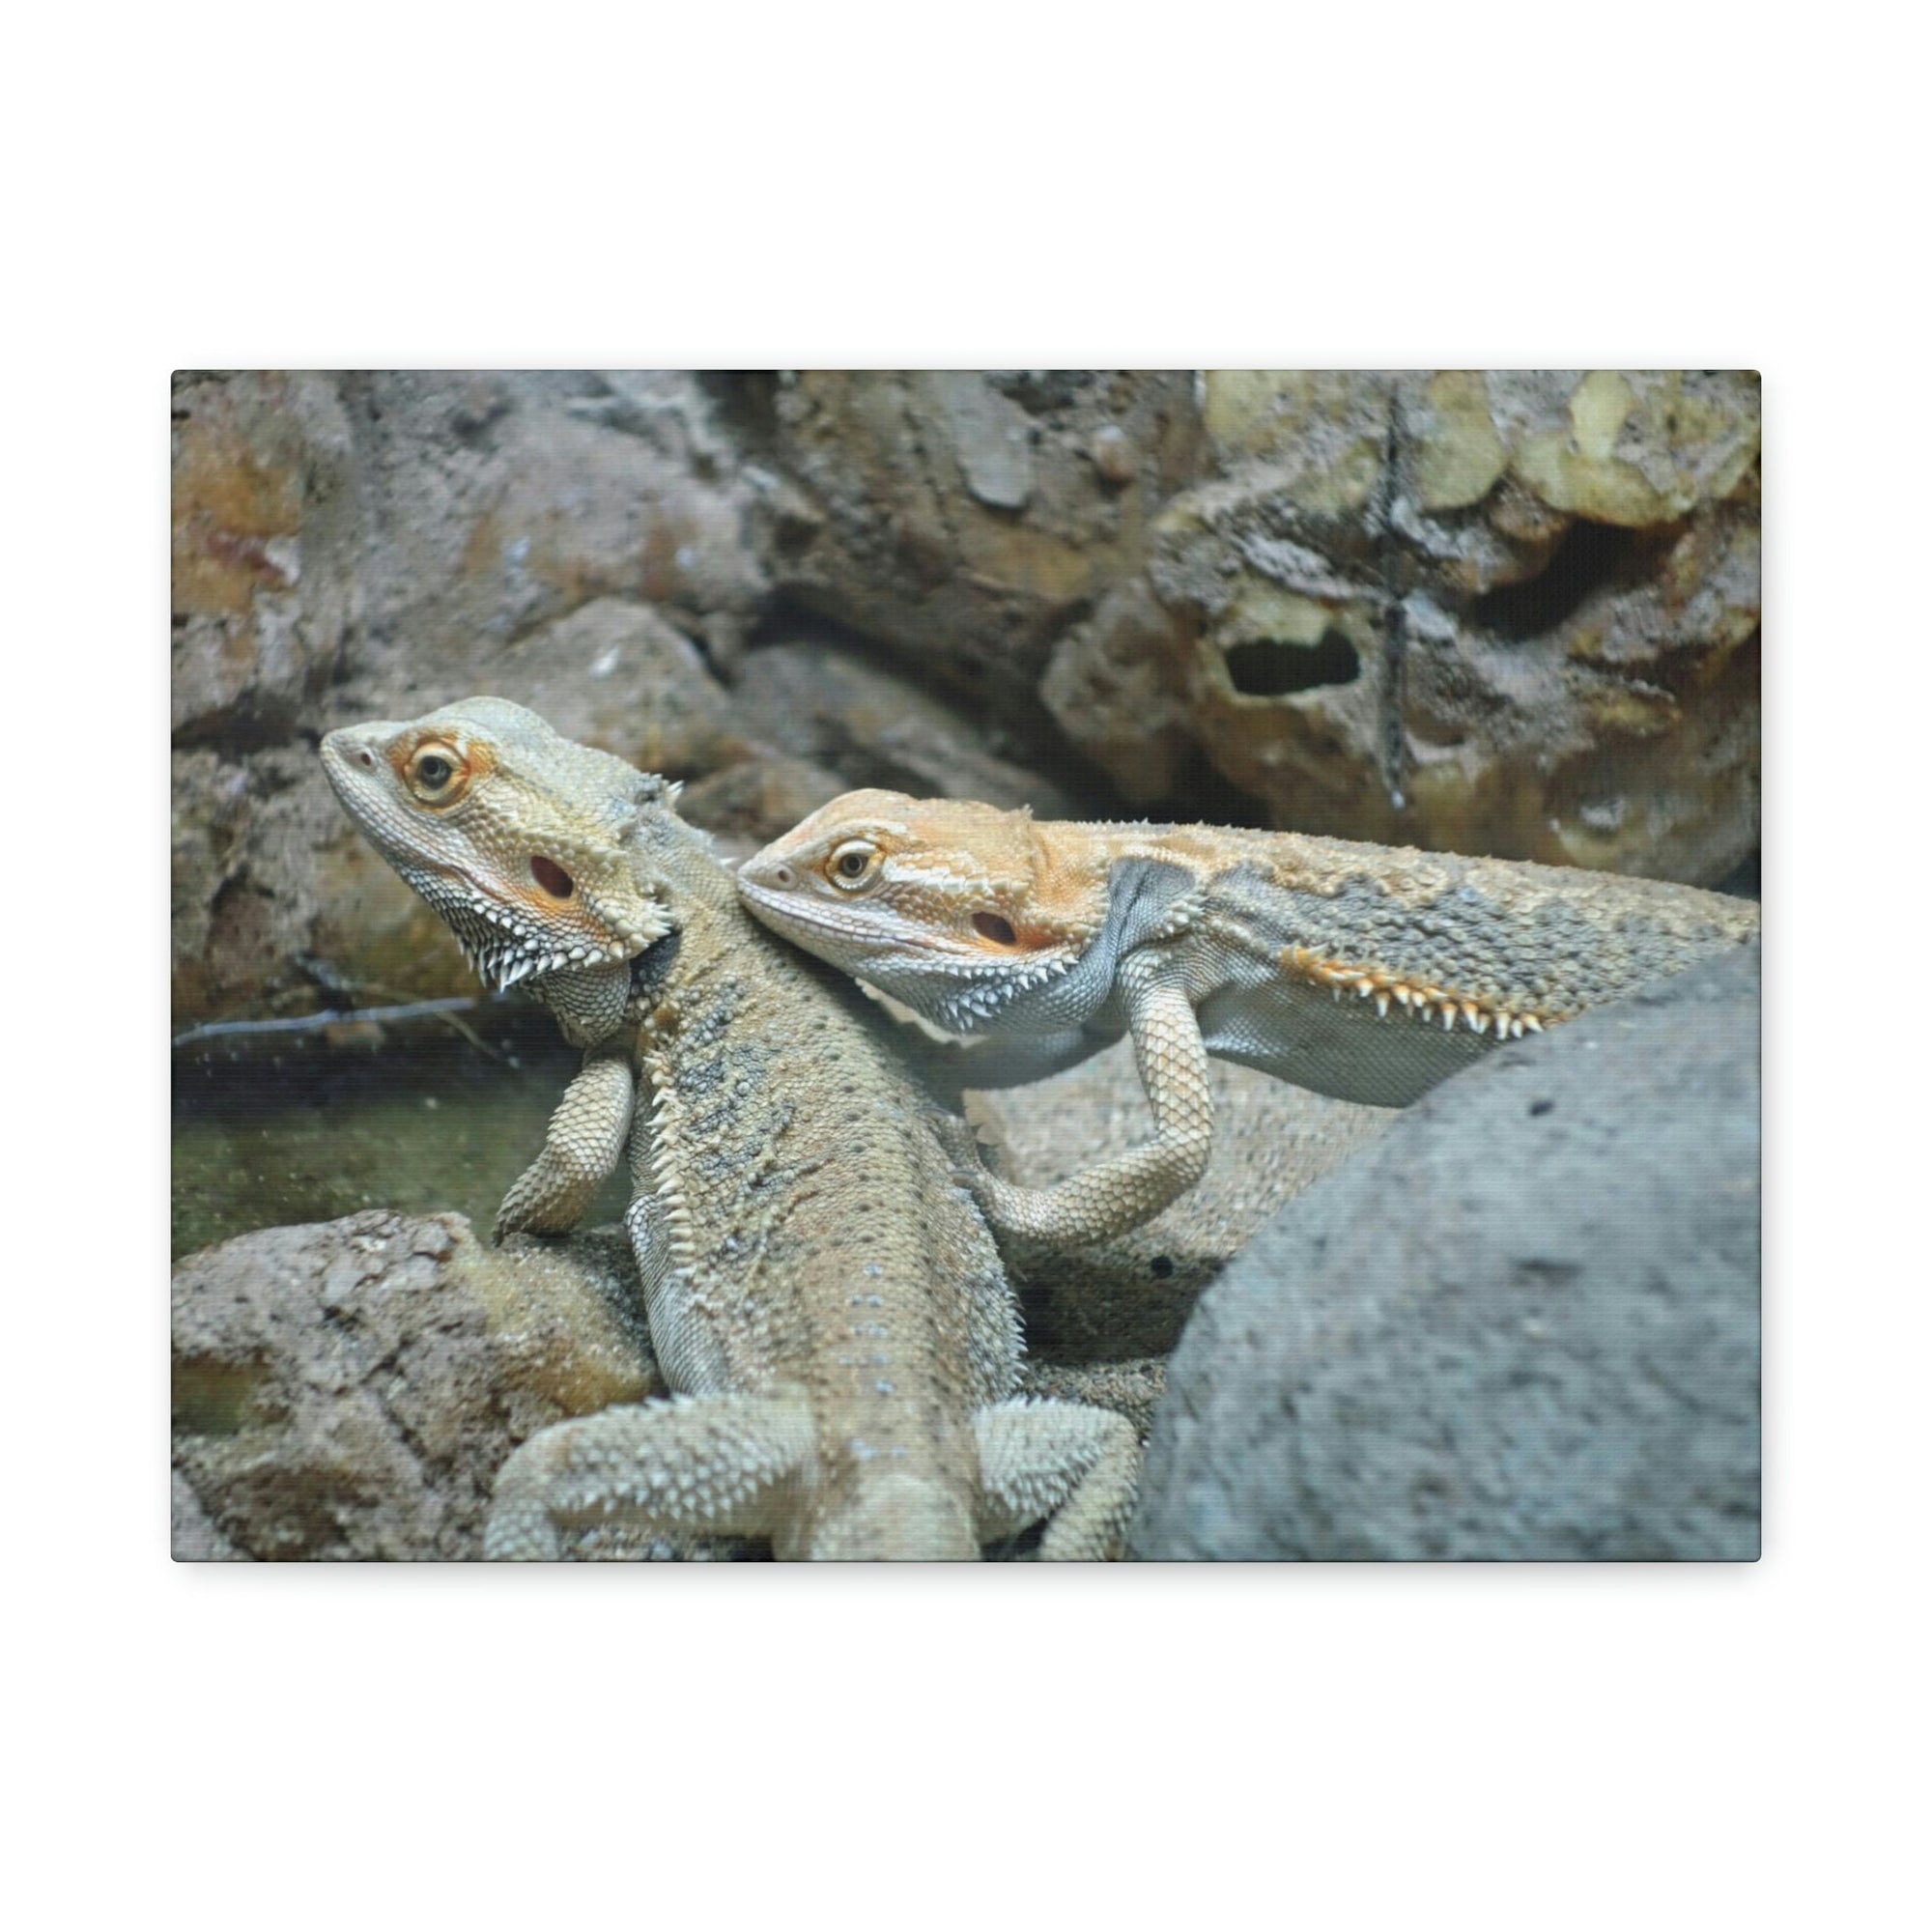 Scripture Walls Water Dragon Couple Water Dragon Couple Print Animal Wall Art Wildlife Canvas Prints Wall Art Ready to Hang Unframed-Express Your Love Gifts